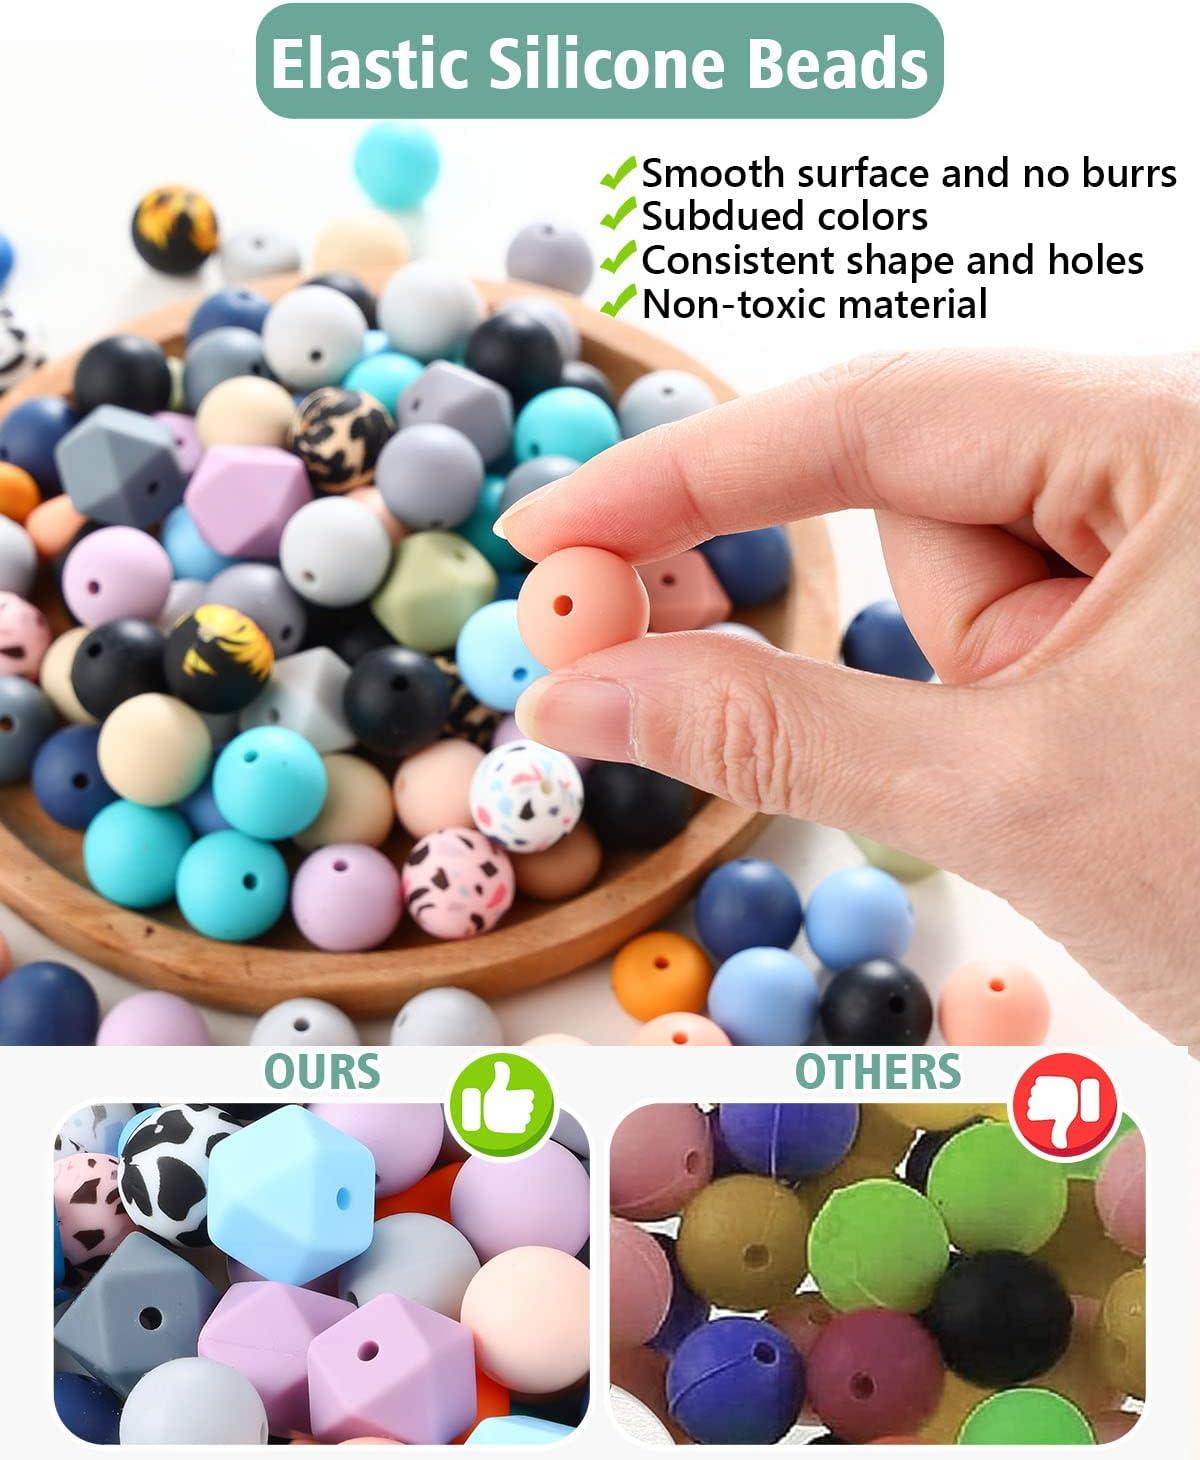 BOZUAN 149 PCS 15MM Silicone Beads for Keychain Making Kit Multiple Styles  and Shapes Silicone Beads Bulk Rubber Beads for Keychains Making